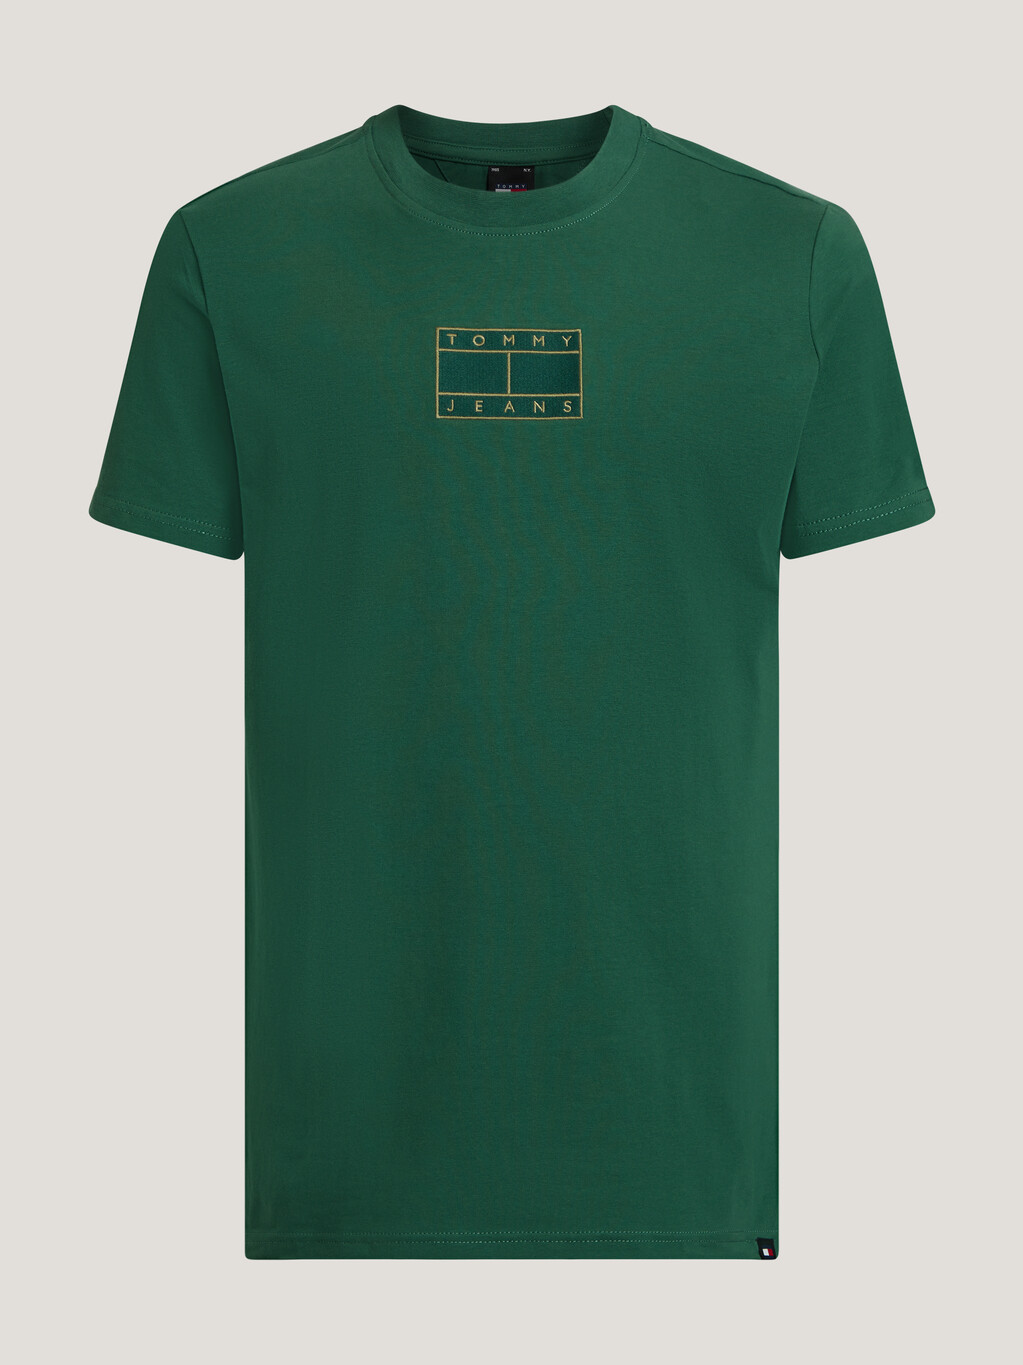 Flag Embroidery Regular Fit T-Shirt, Court Green, hi-res